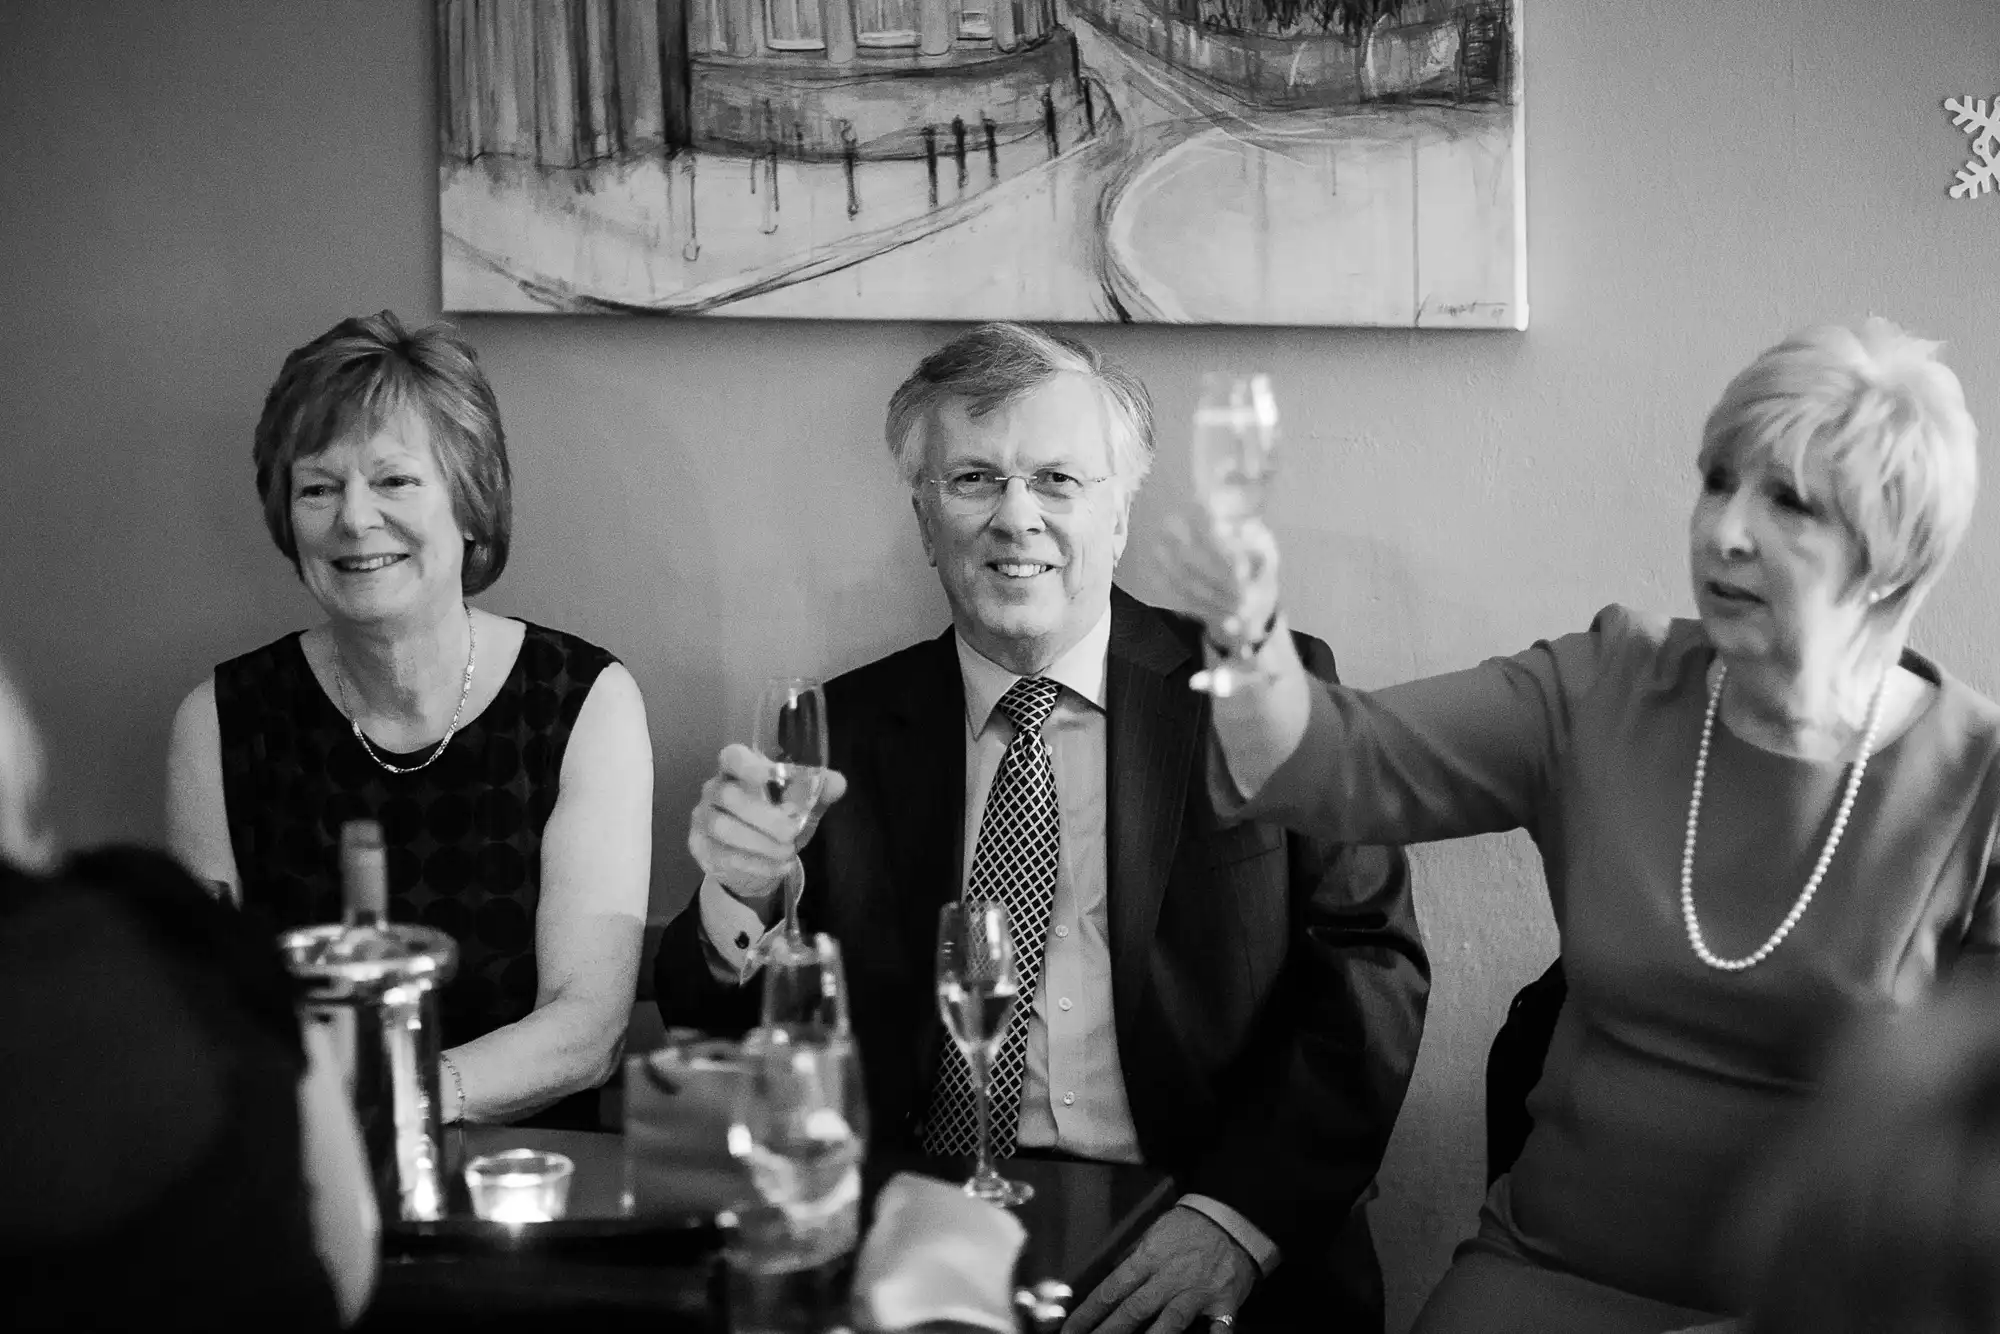 Three older adults enjoying a toast in a restaurant, with a painting in the background; two women and one man, all smiling.